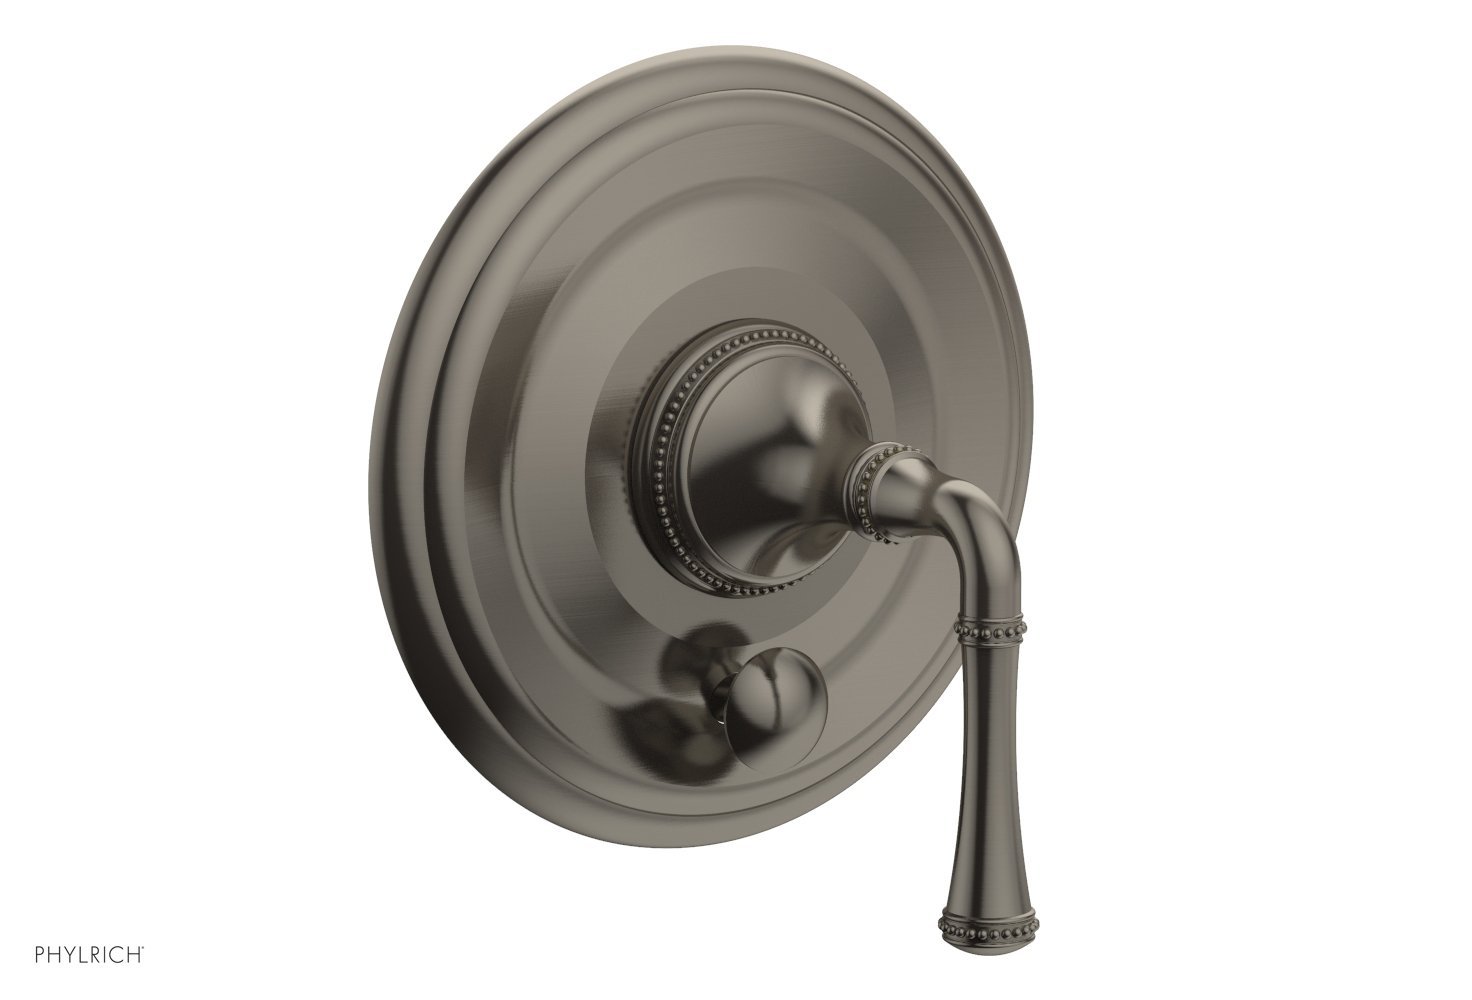 PHYLRICH 4-129/15A BEADED WALL MOUNT PRESSURE BALANCE SHOWER PLATE WITH DIVERTER AND LEVER HANDLE